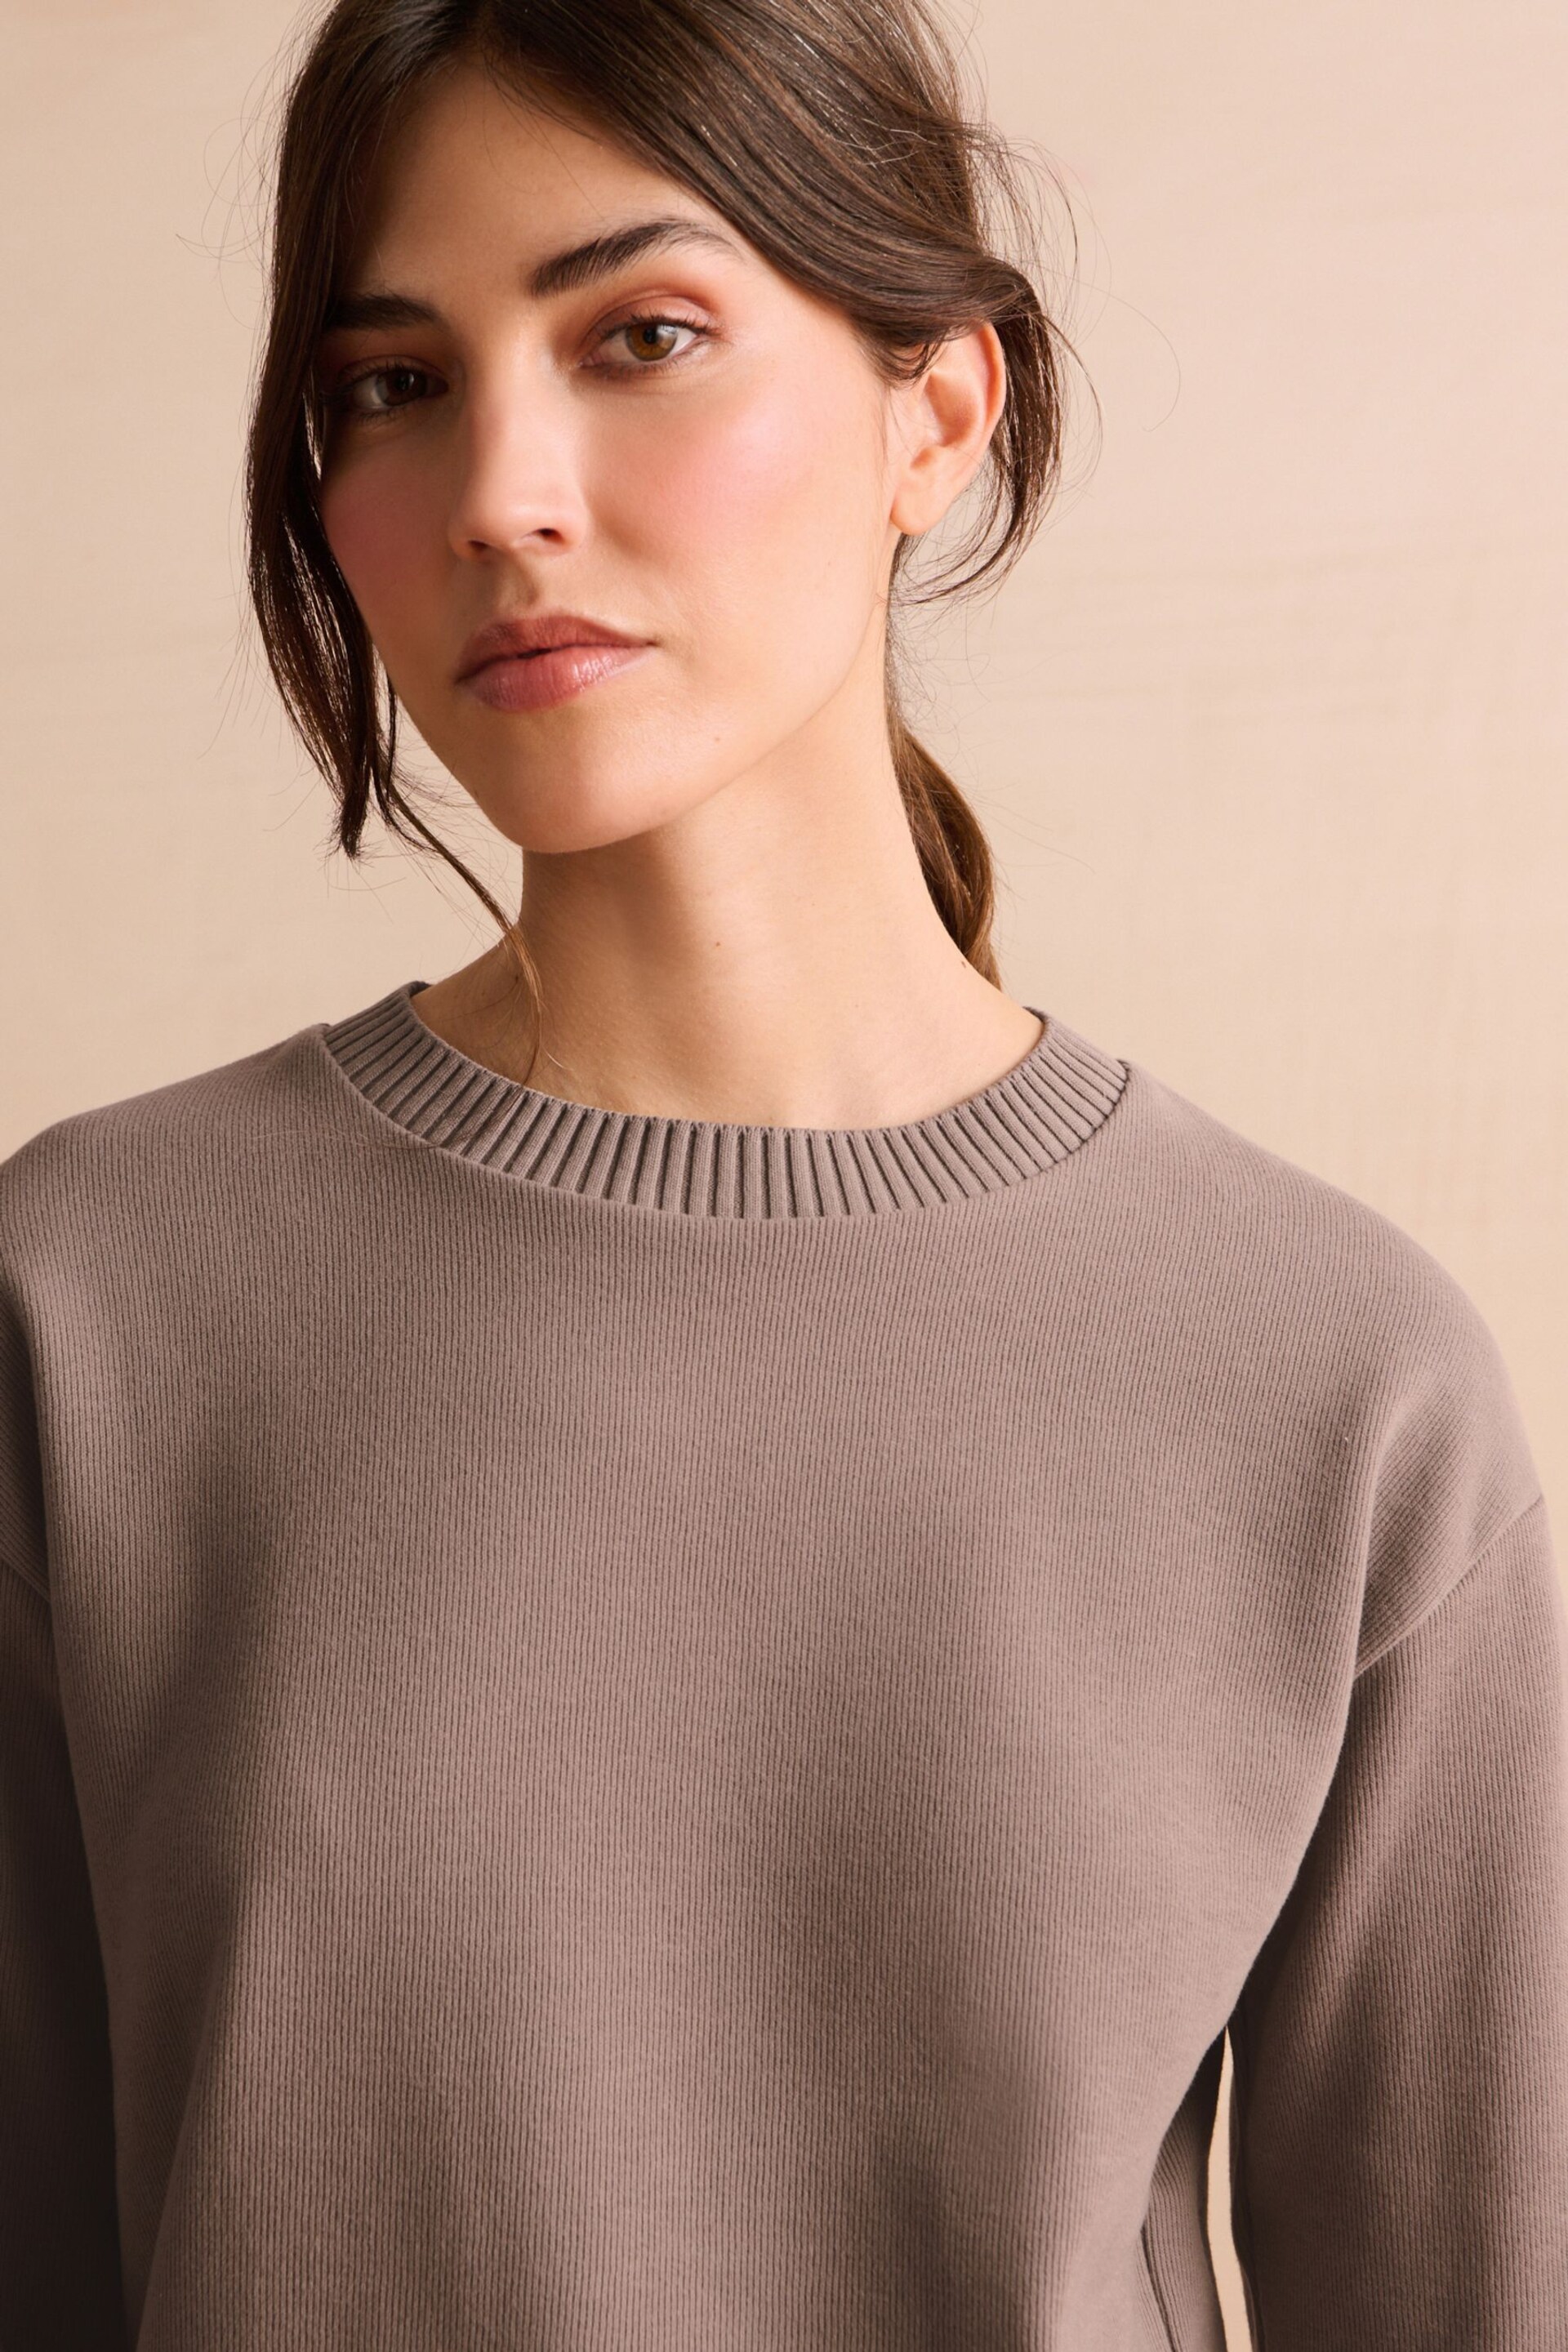 Neutral Taupe Relaxed Fit Textured Rib Long Sleeve Cosy Knit Jumper Top - Image 4 of 6